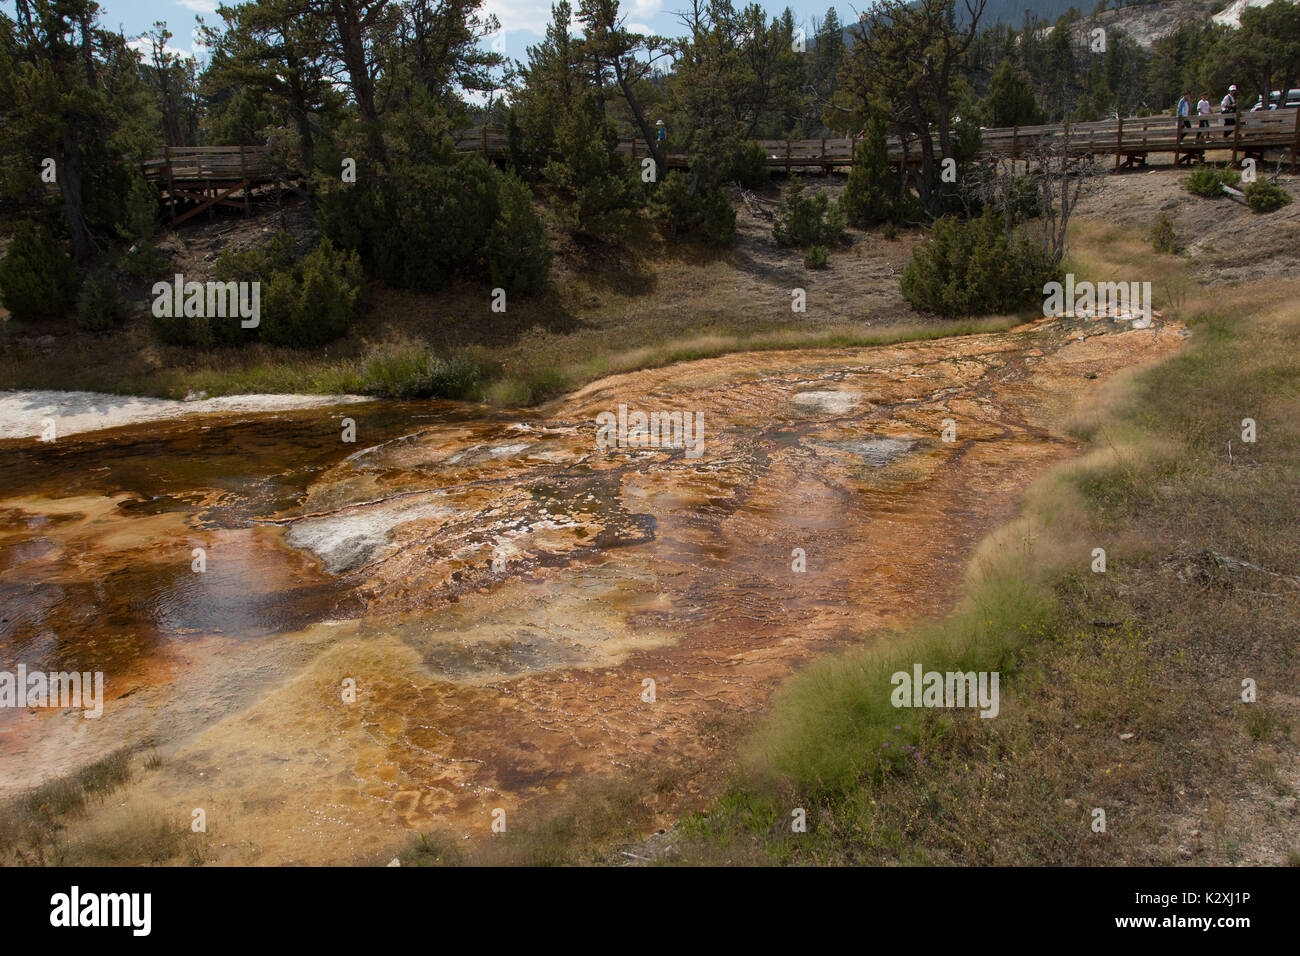 Bacteria and Algea color the Minerva Terrace in Mammoth Hot Springs, Yellowstone National Park, WY Stock Photo